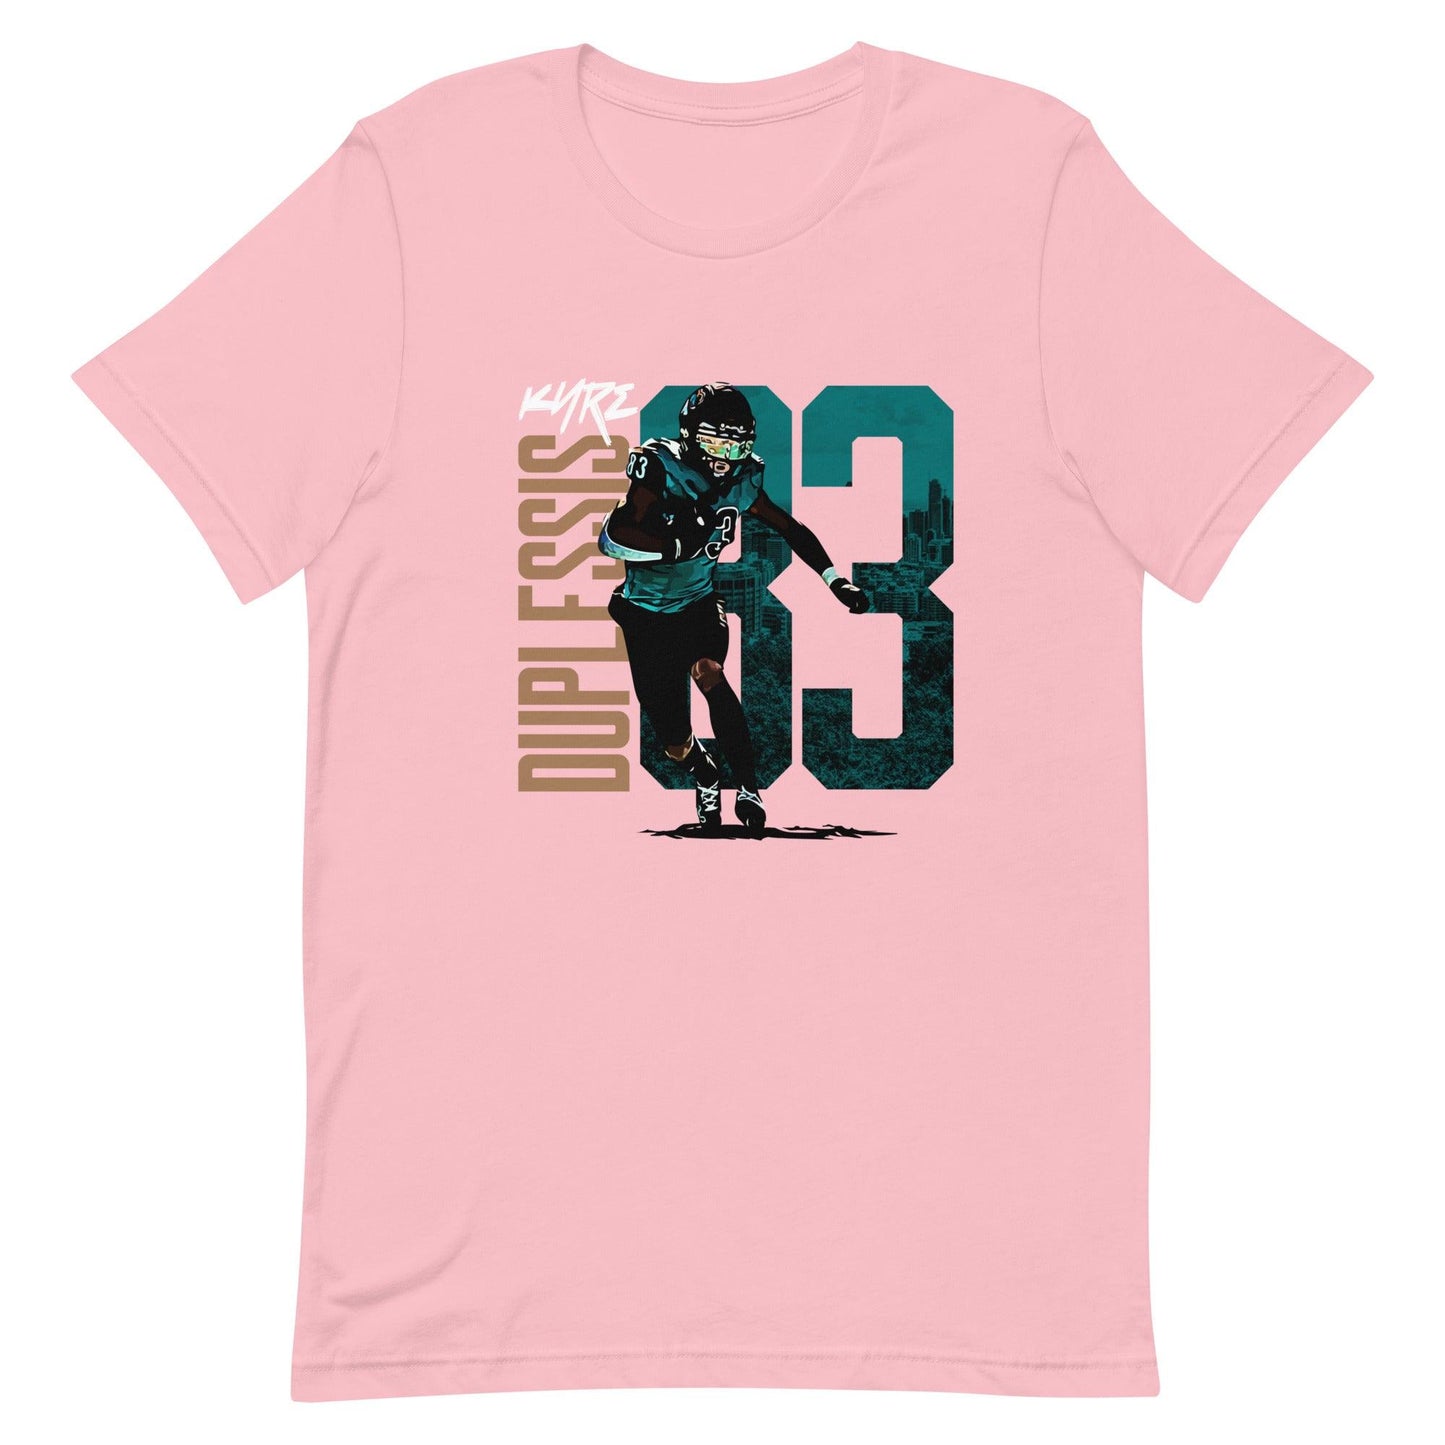 Kyre Duplessis "Gameday" t-shirt - Fan Arch